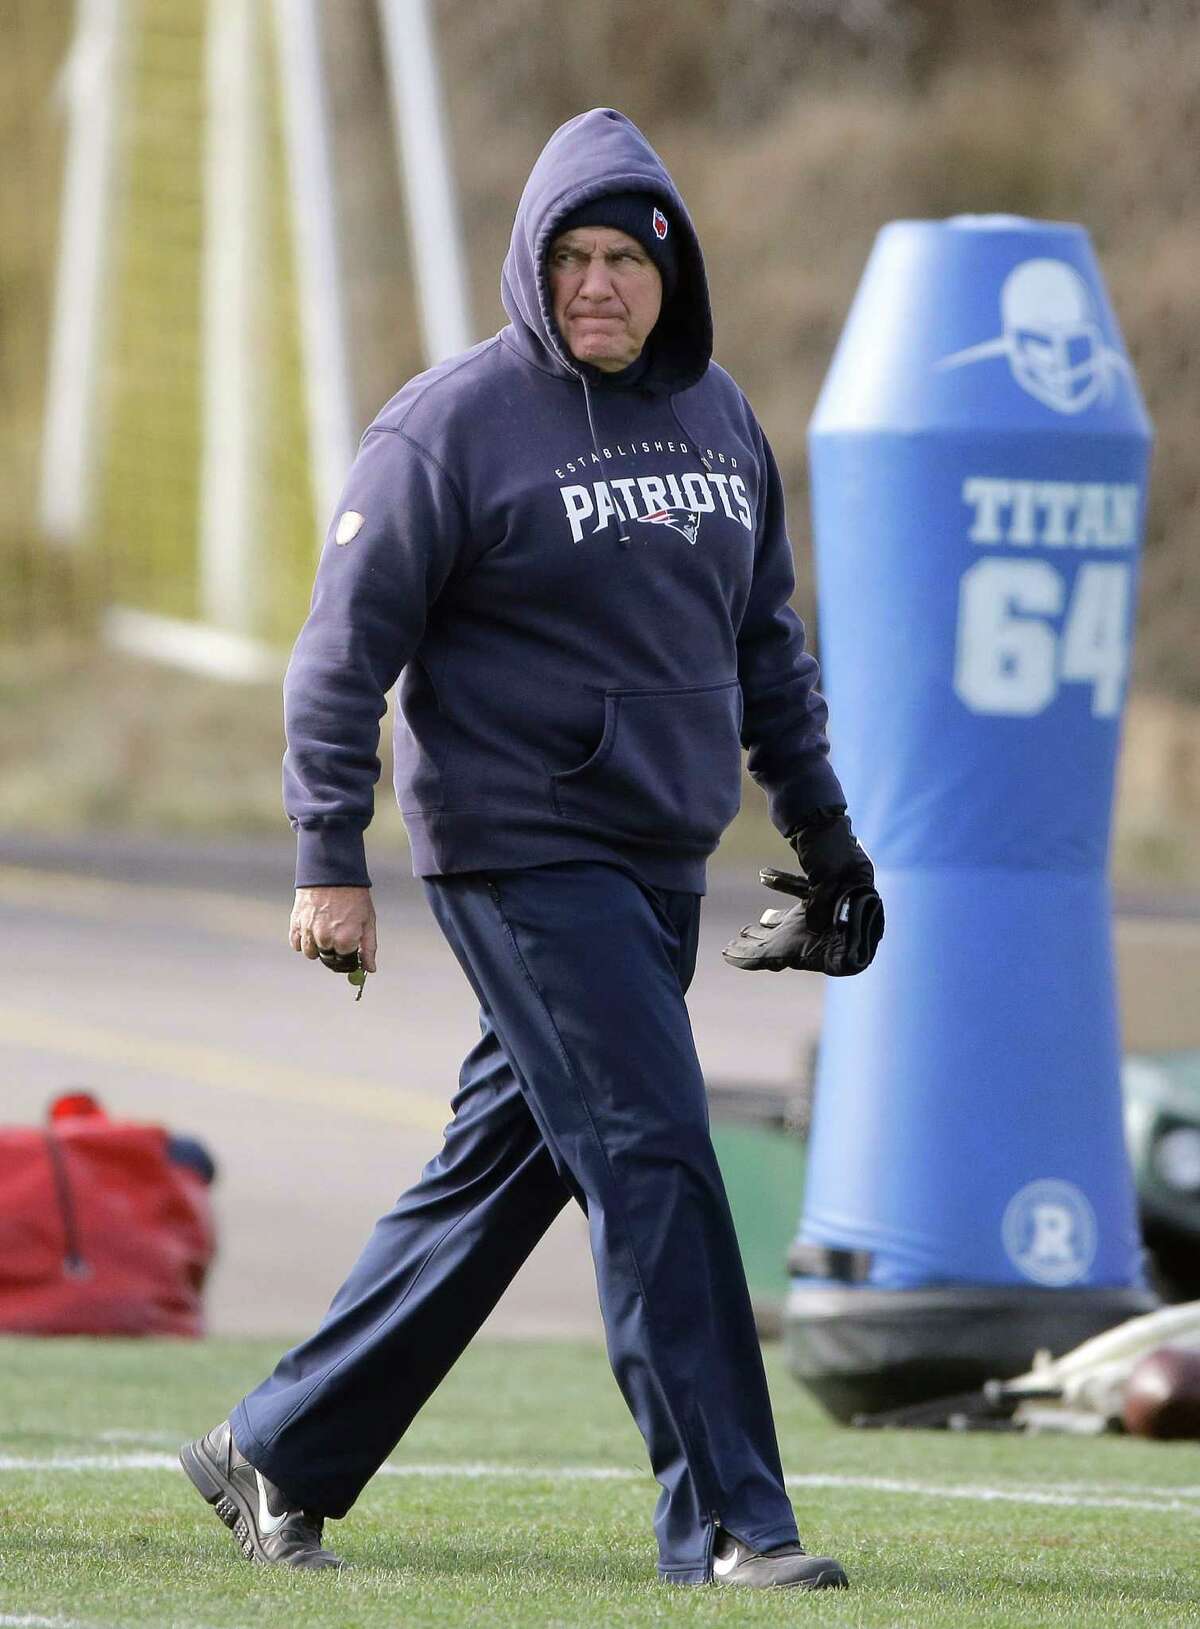 New England Patriots head coach Bill Belichick walks on the field during an NFL football practice, Tuesday, Jan. 12, 2016, in Foxborough, Mass. The Patriots are to host the Kansas City Chiefs in an NFL divisional playoff game Jan. 16, 2016, in Foxborough. (AP Photo/Steven Senne) ORG XMIT: MASR108